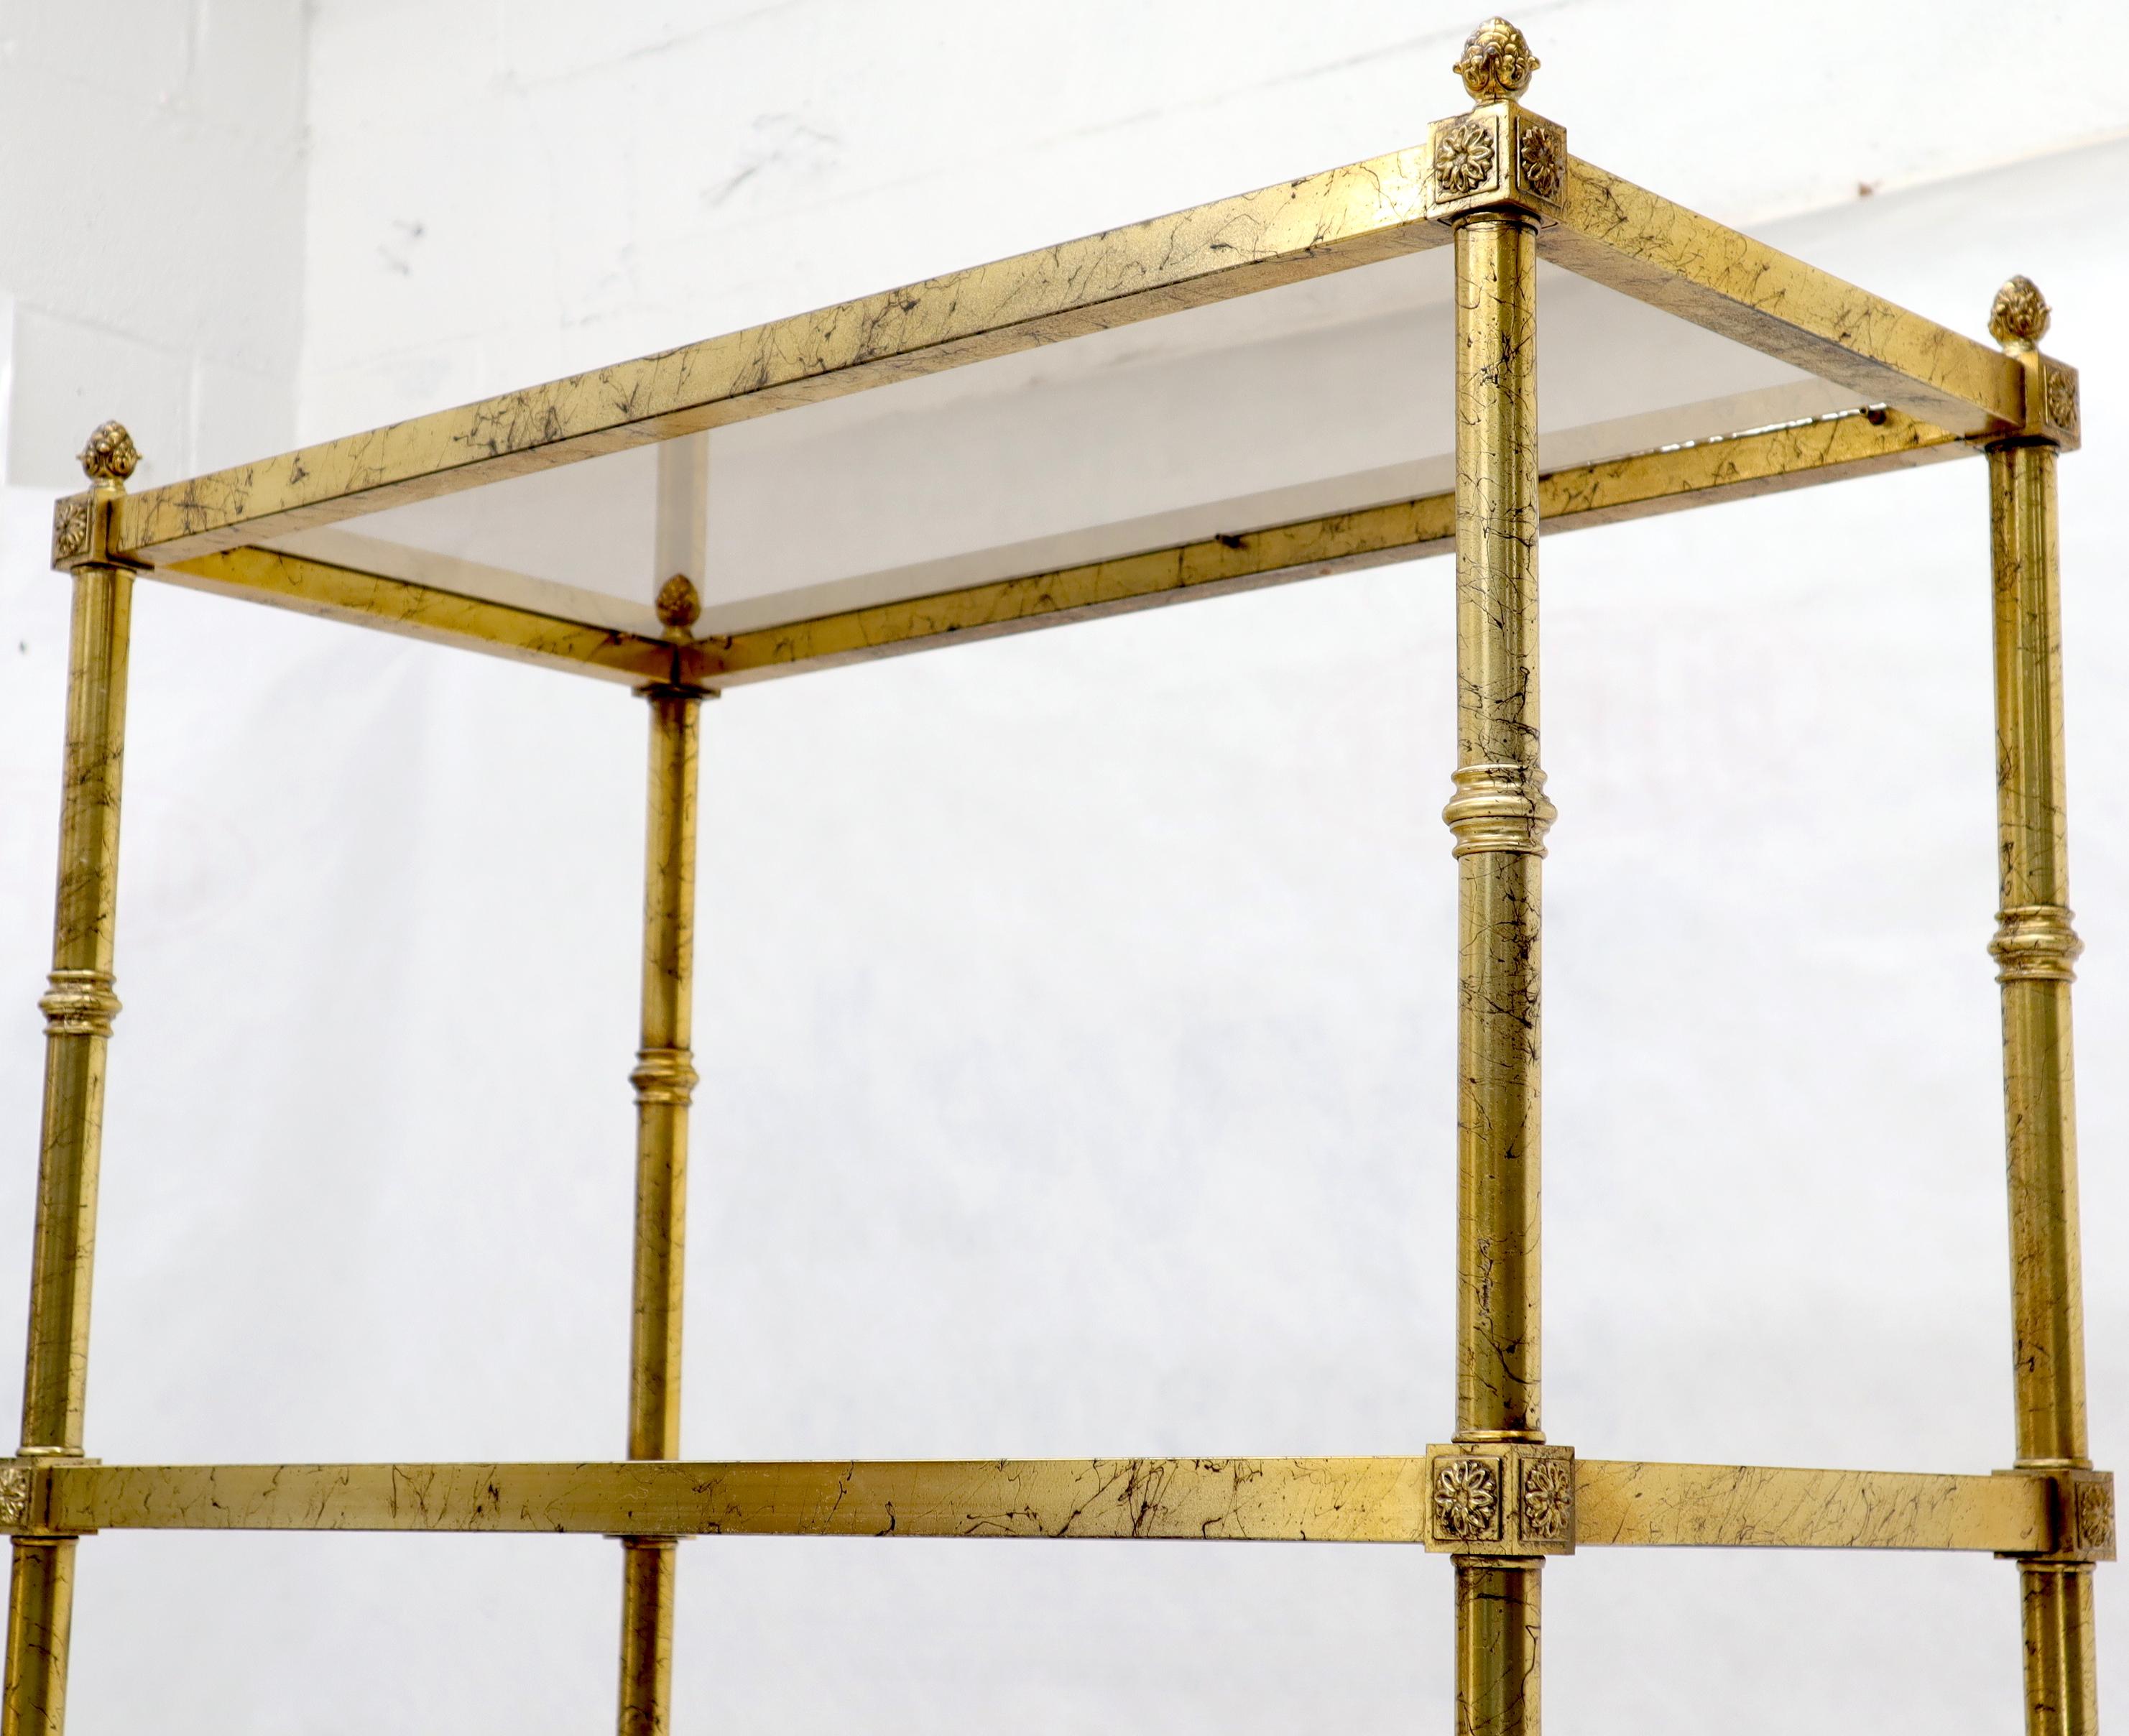 Pair of vintage Italian gold gilt smoked glass shelves étagères with pineapple finials.